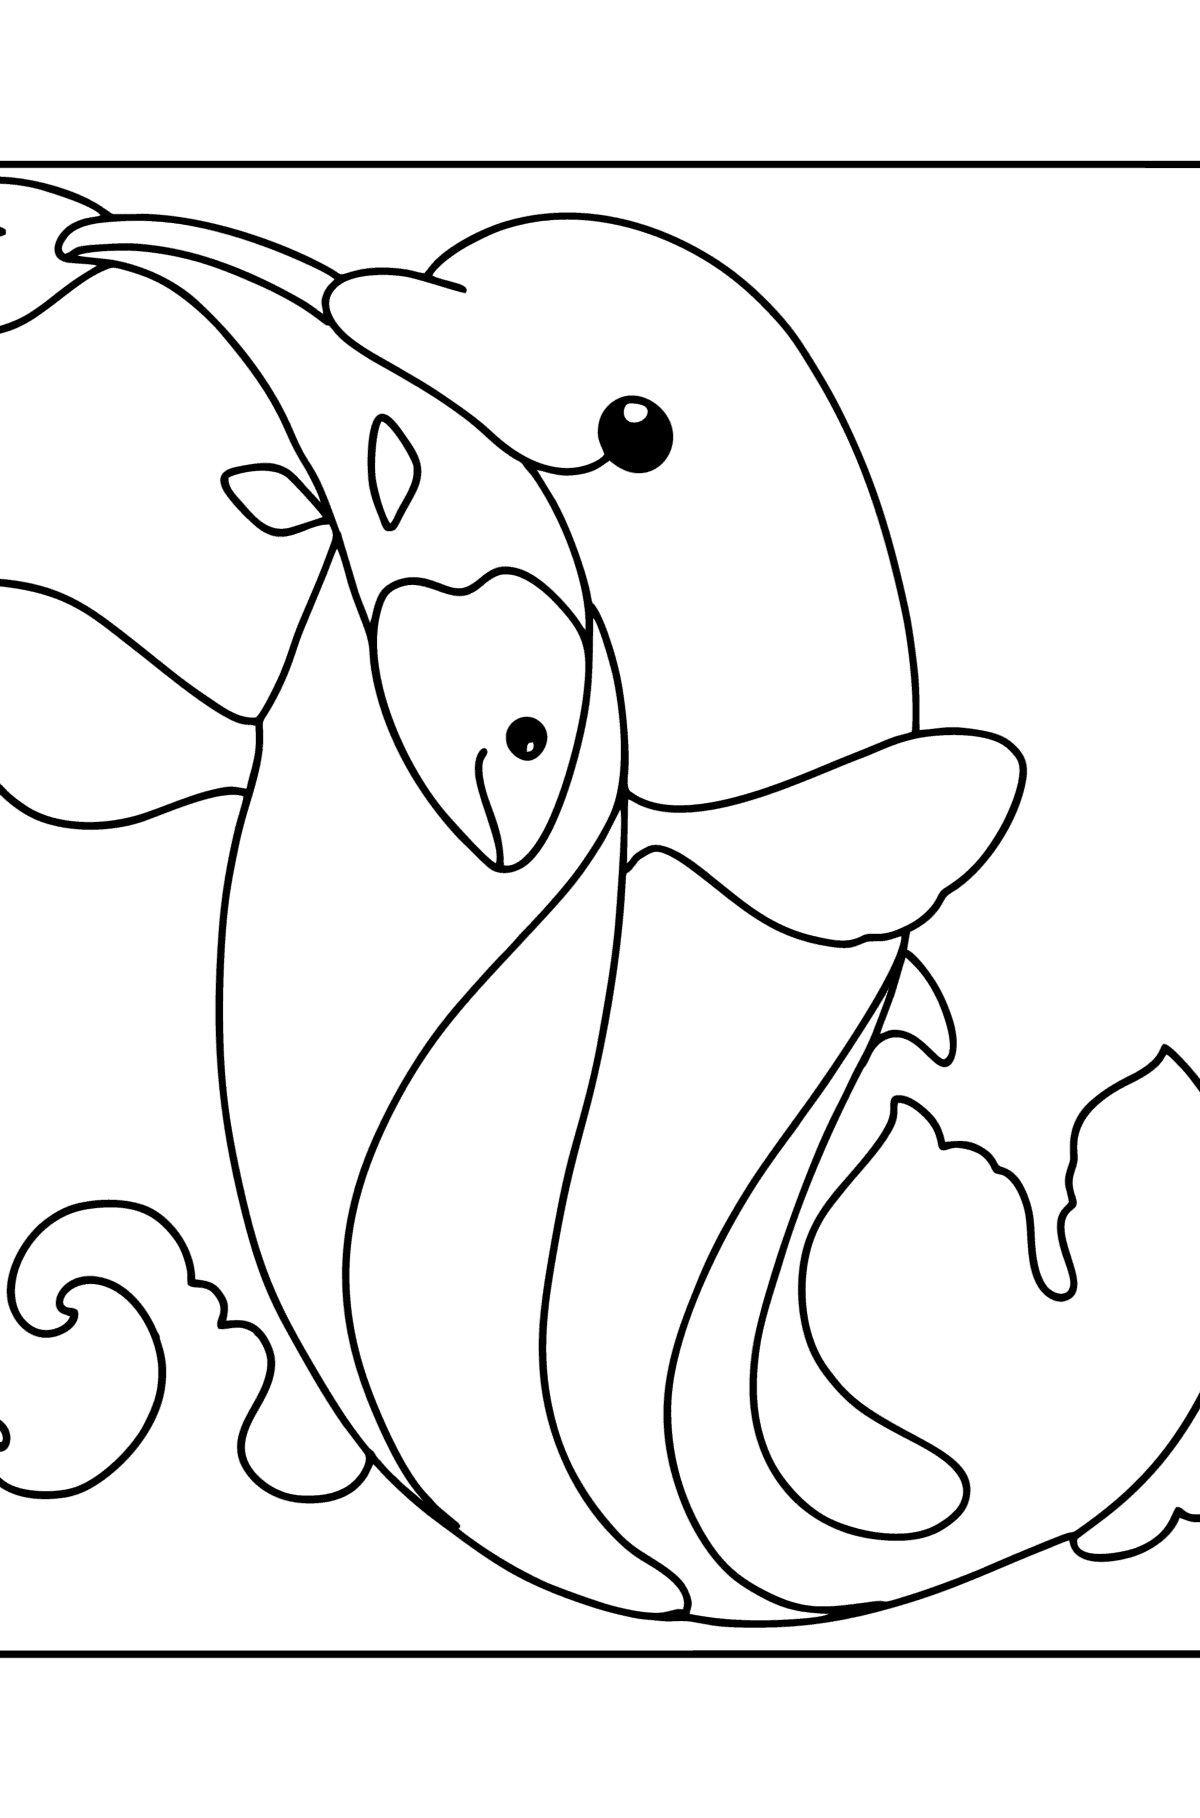 Dolphin Caught a Fish coloring page - Coloring Pages for Kids